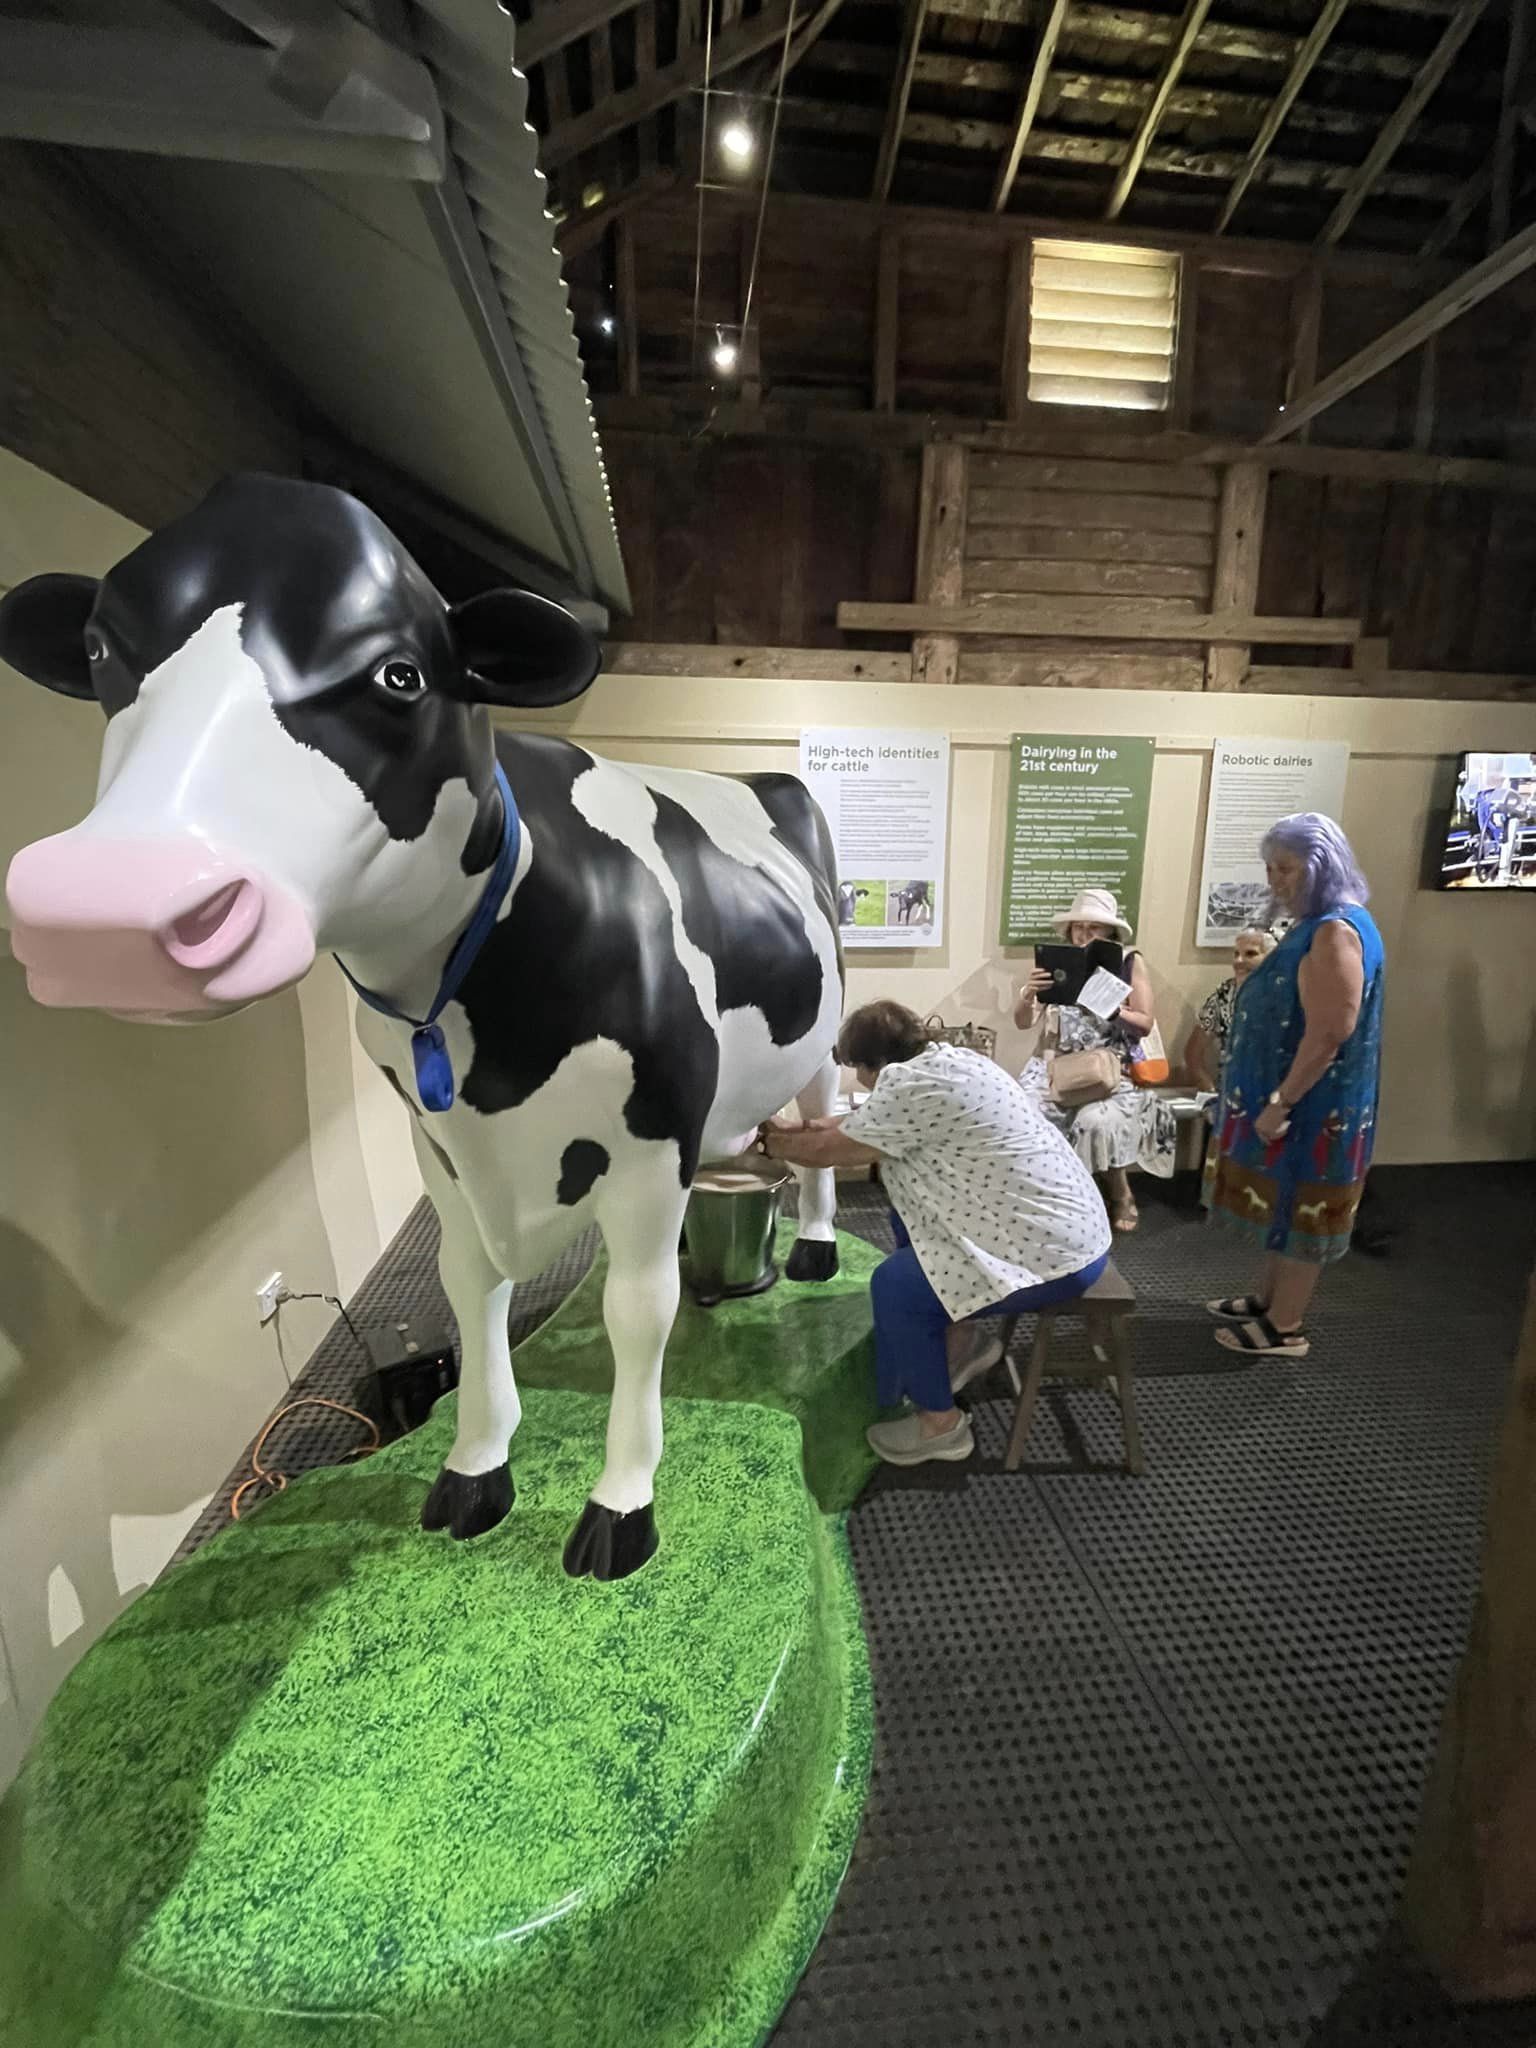 Tour group milking Besty the artificial cow